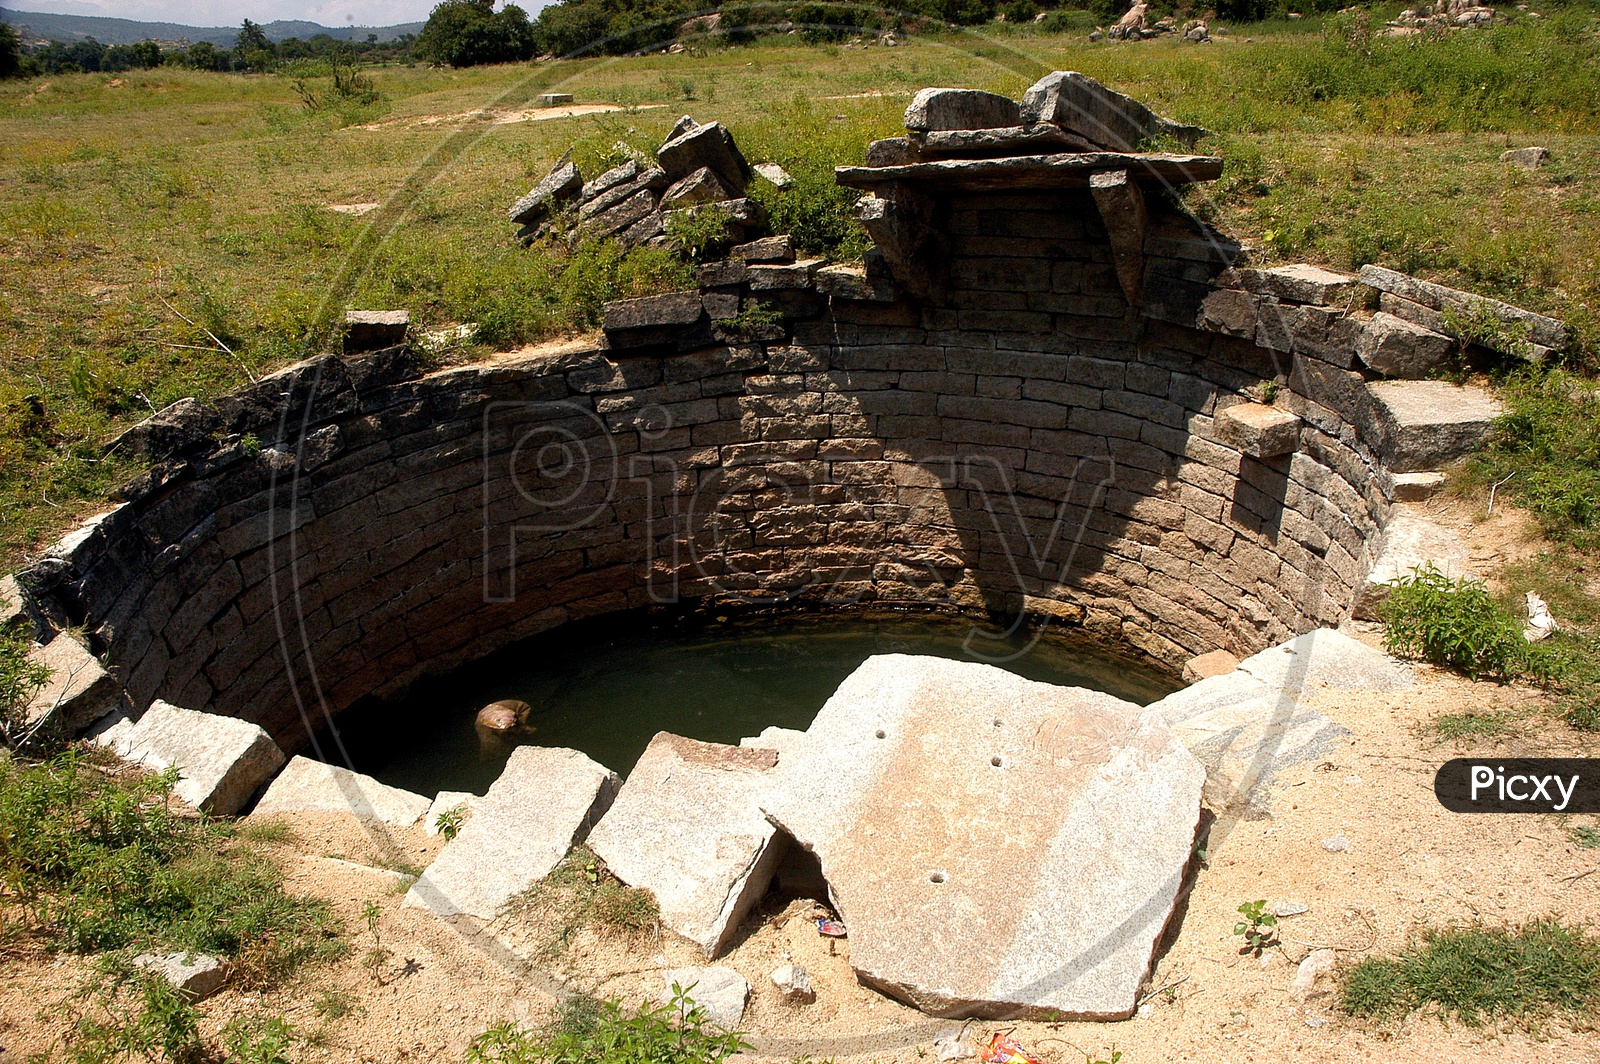 A Well With Water